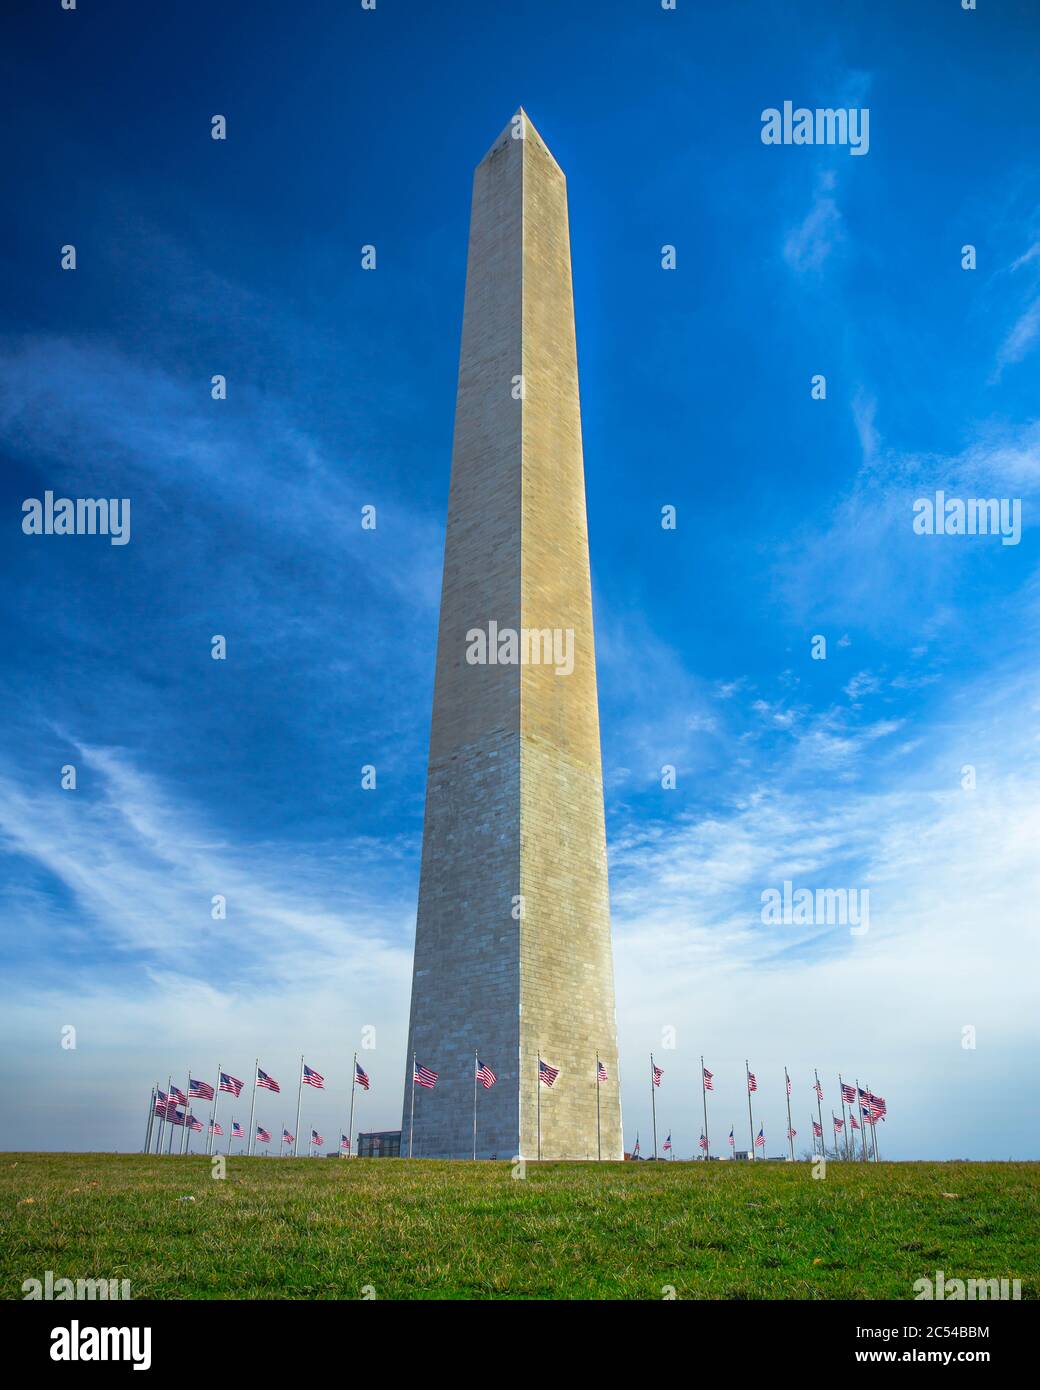 The Washington Monument in Washington, D.C. surrounded by American flags against a blue sky Stock Photo